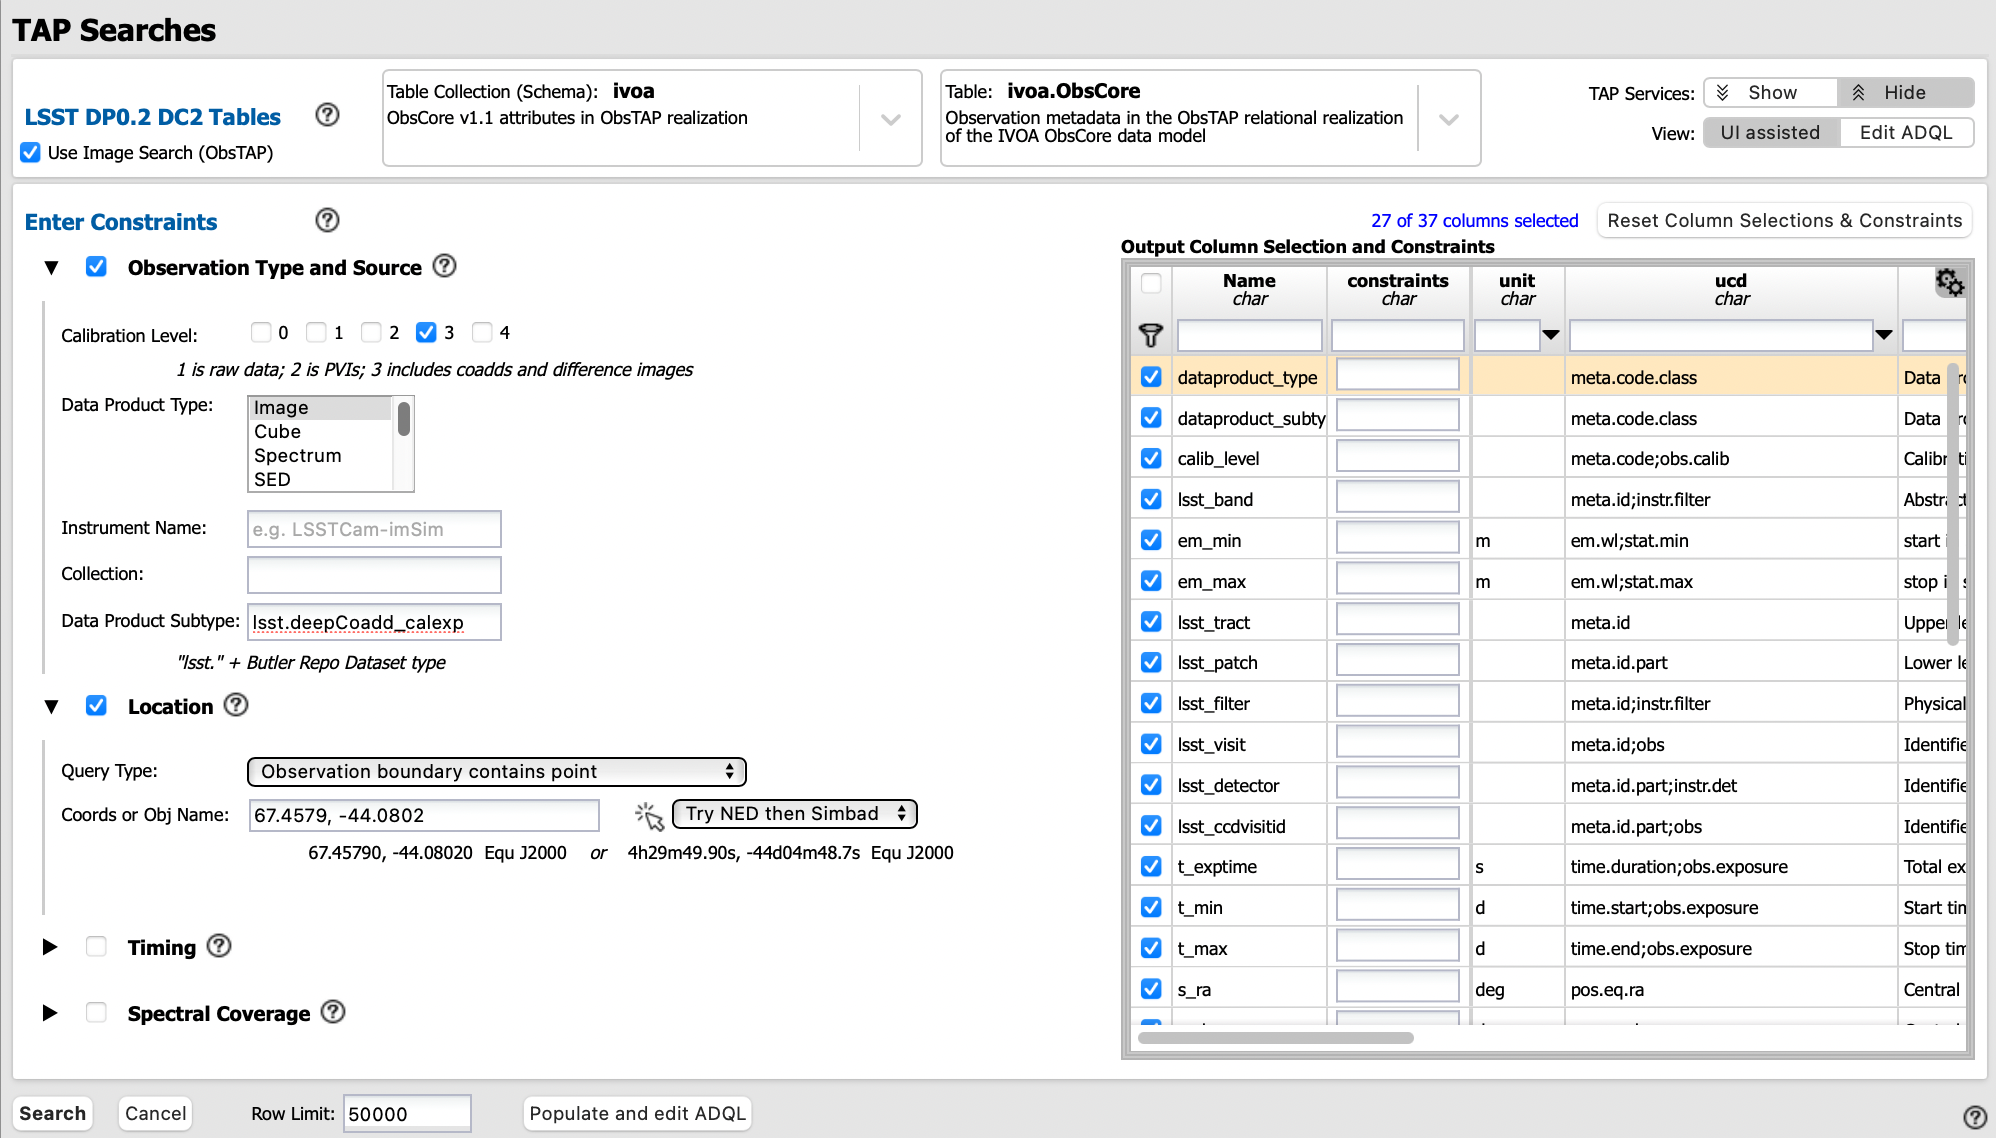 The default view of the RSP Portal’s user interface is shown in this image. From this window a user can select information to customize their search parameters for type of service, type of tables, search constraints, and select the number of rows to return.